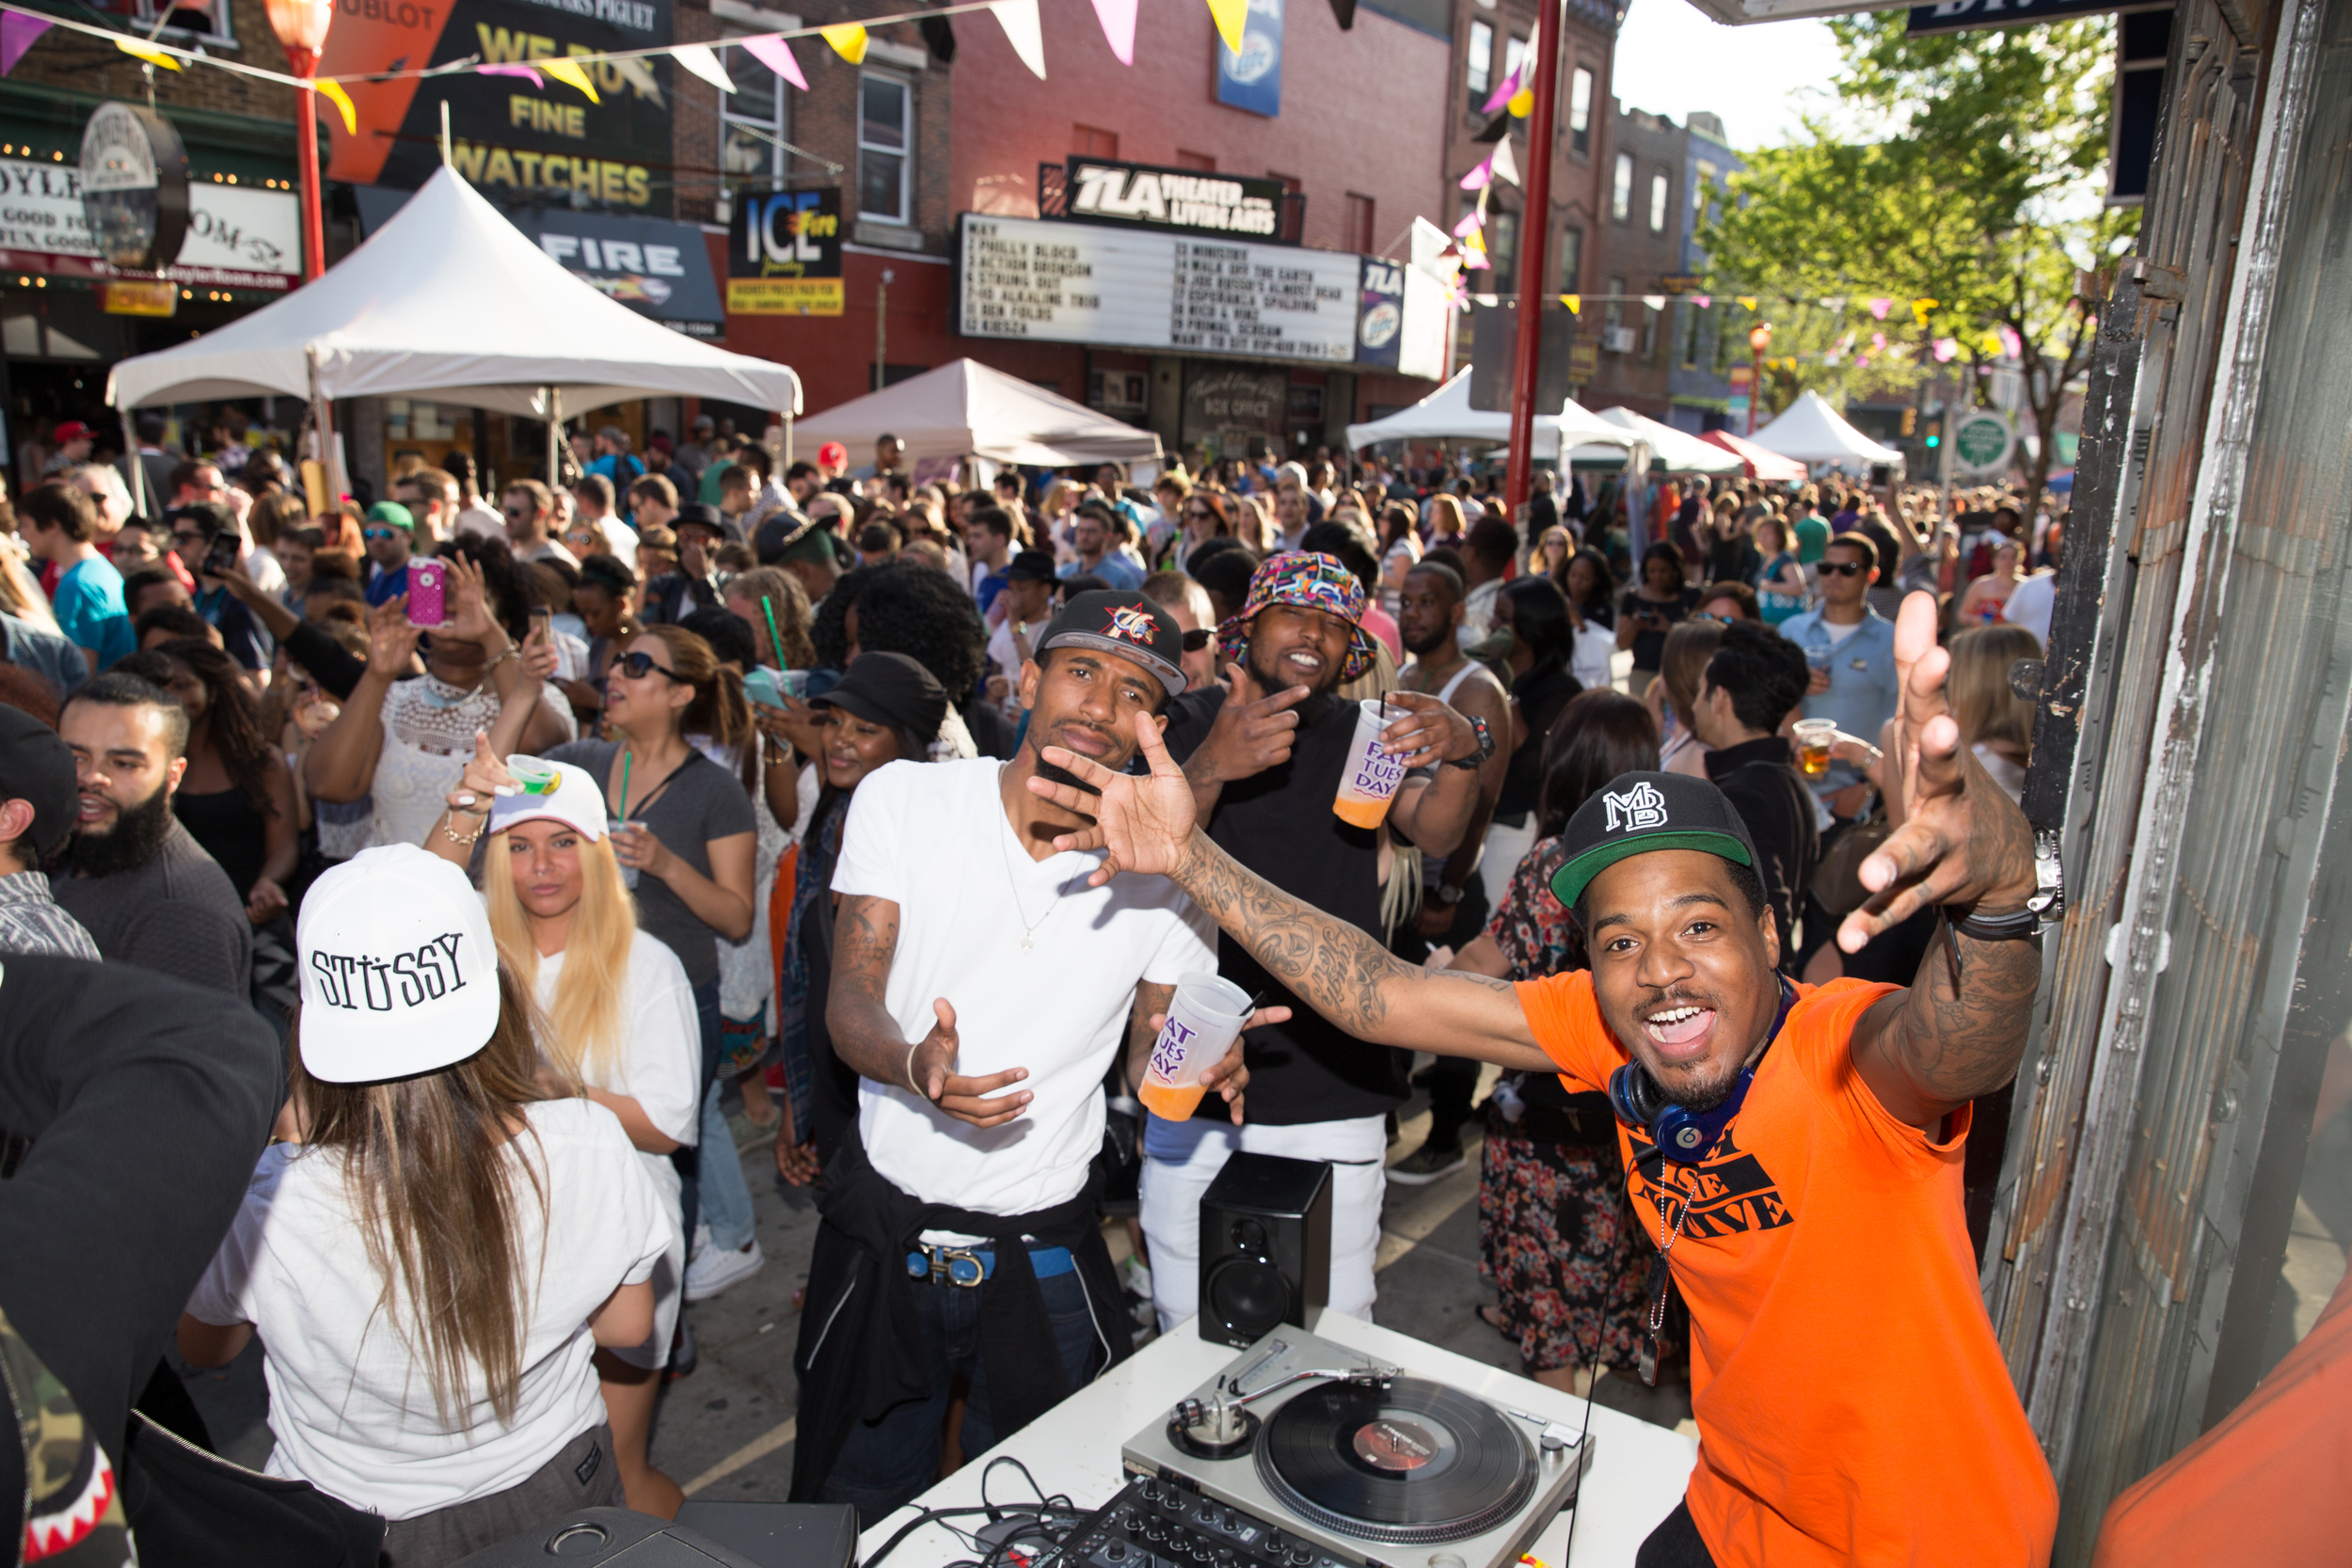 DJs, street performers and muscians entertained the crowds.jpg